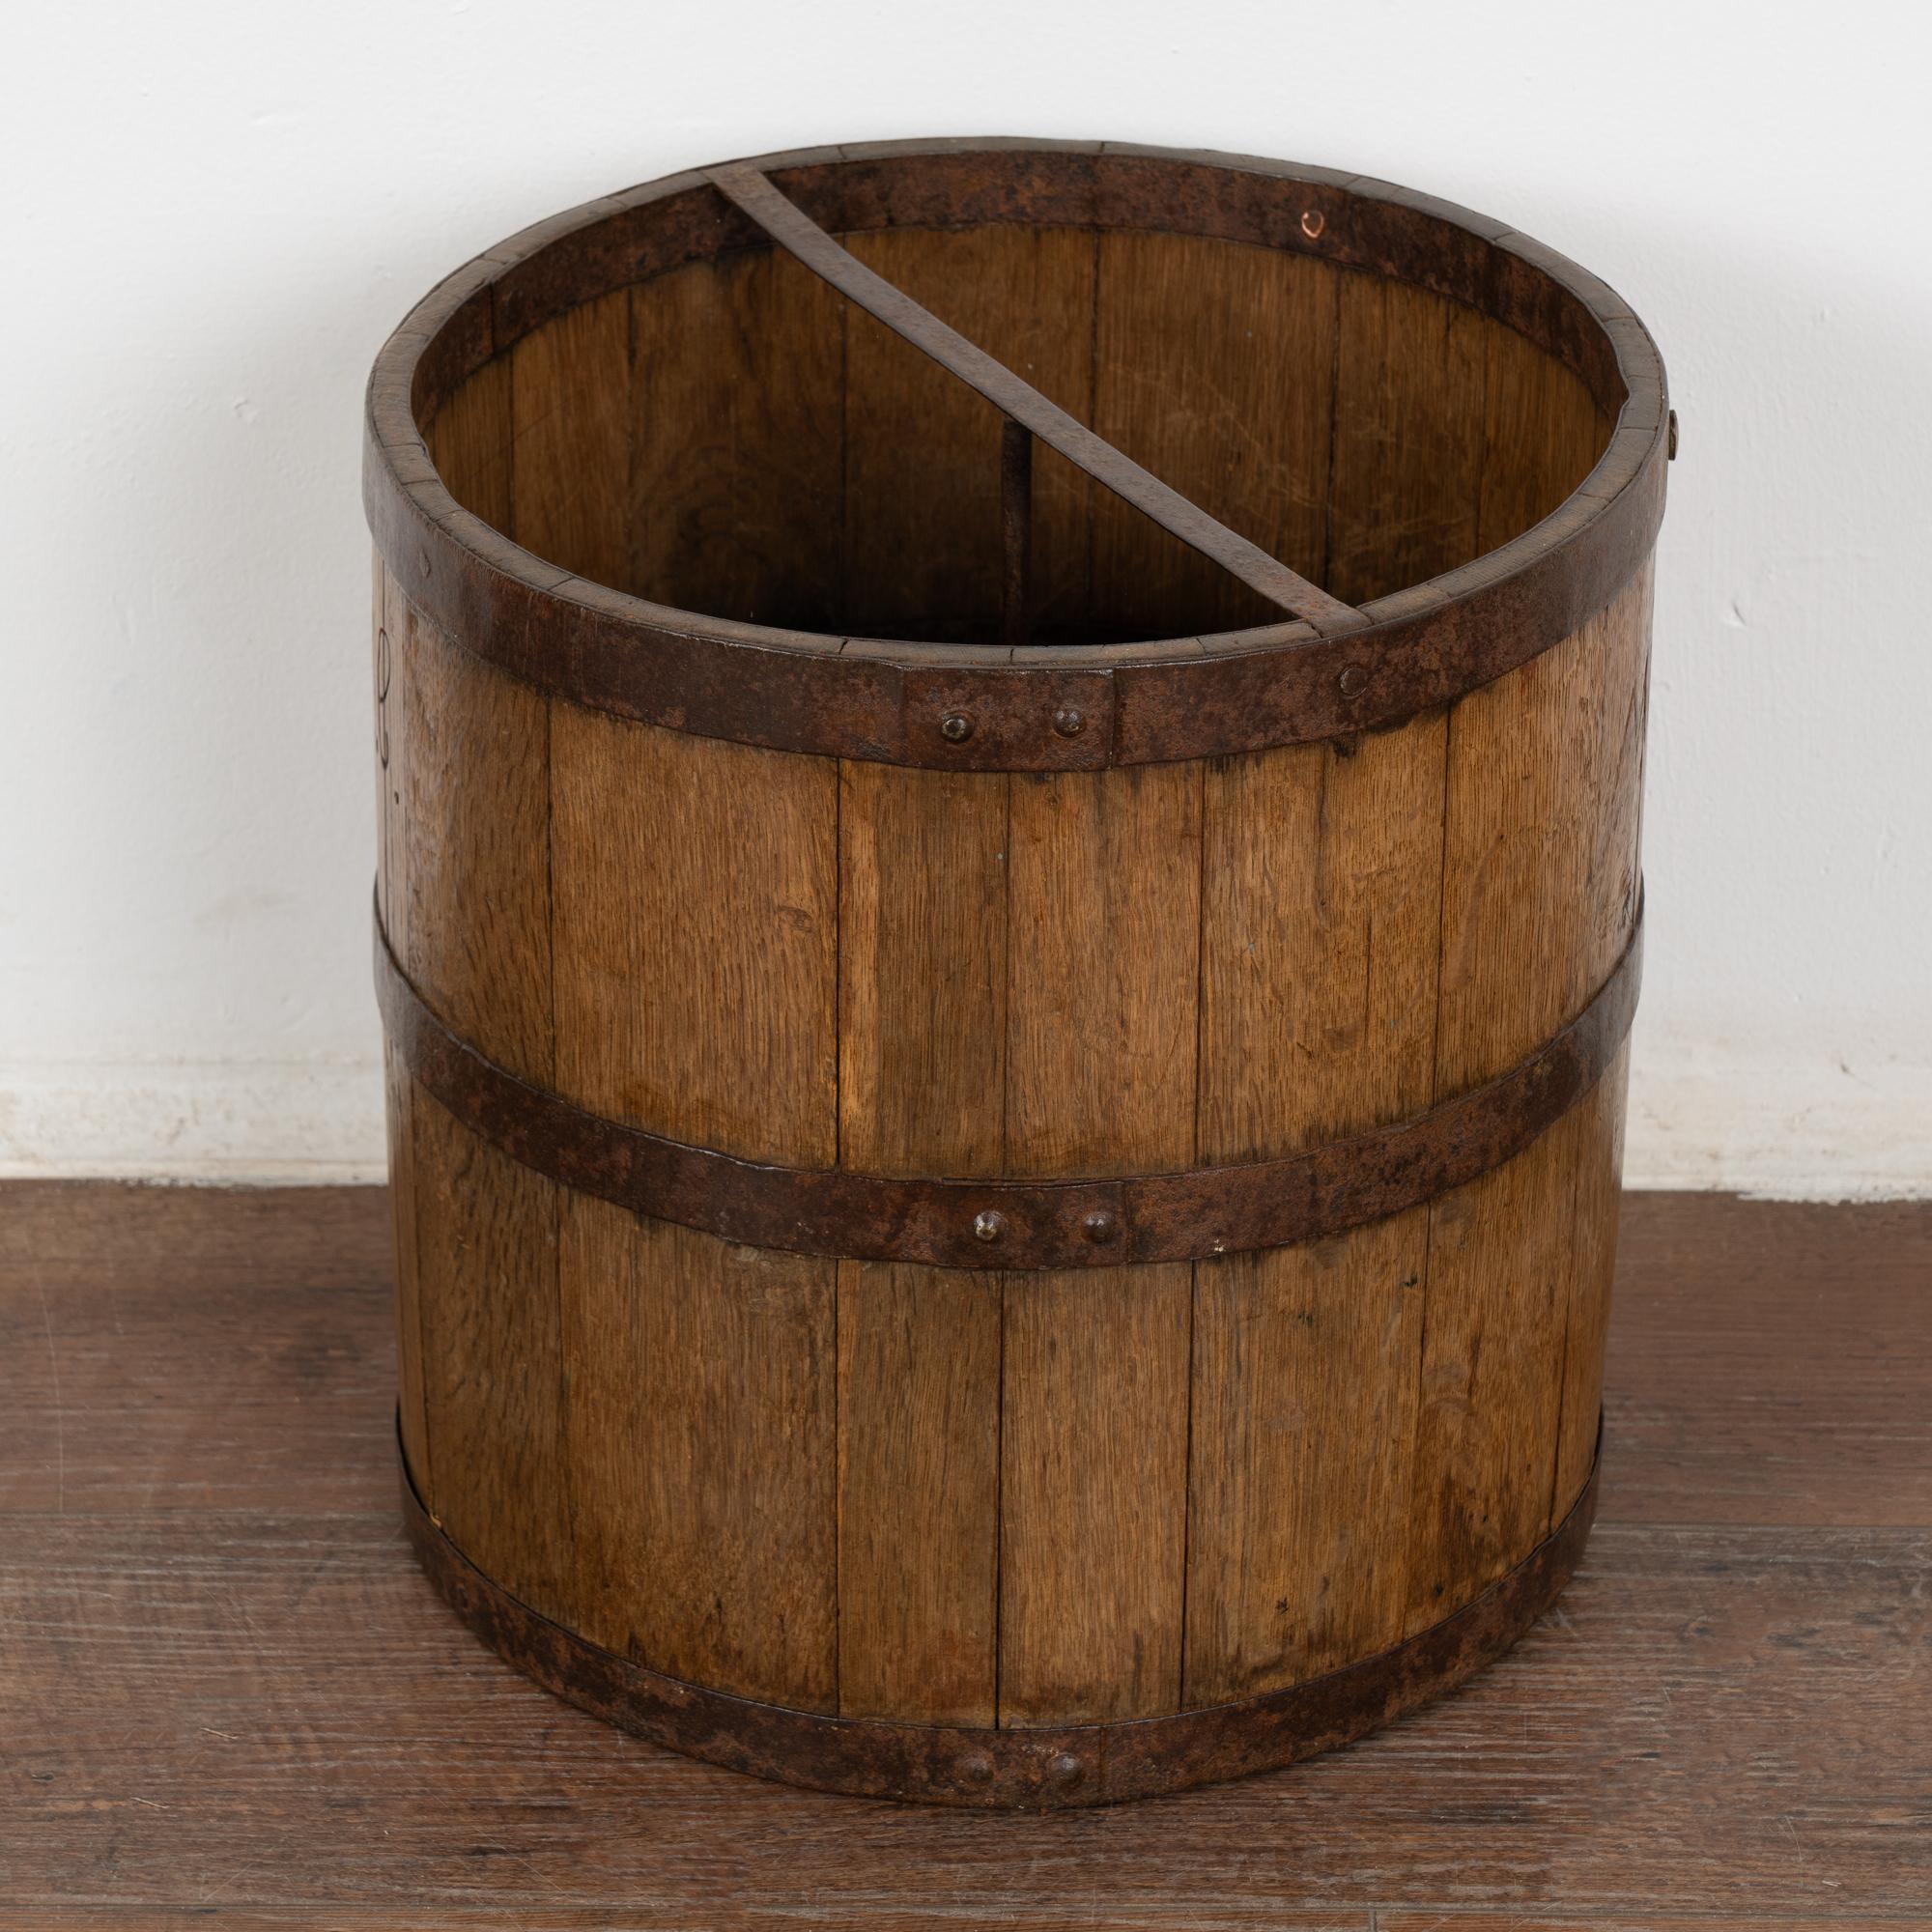 Hungarian Oak Measuring Bucket with Metal Bands, Hungary circa 1920 For Sale